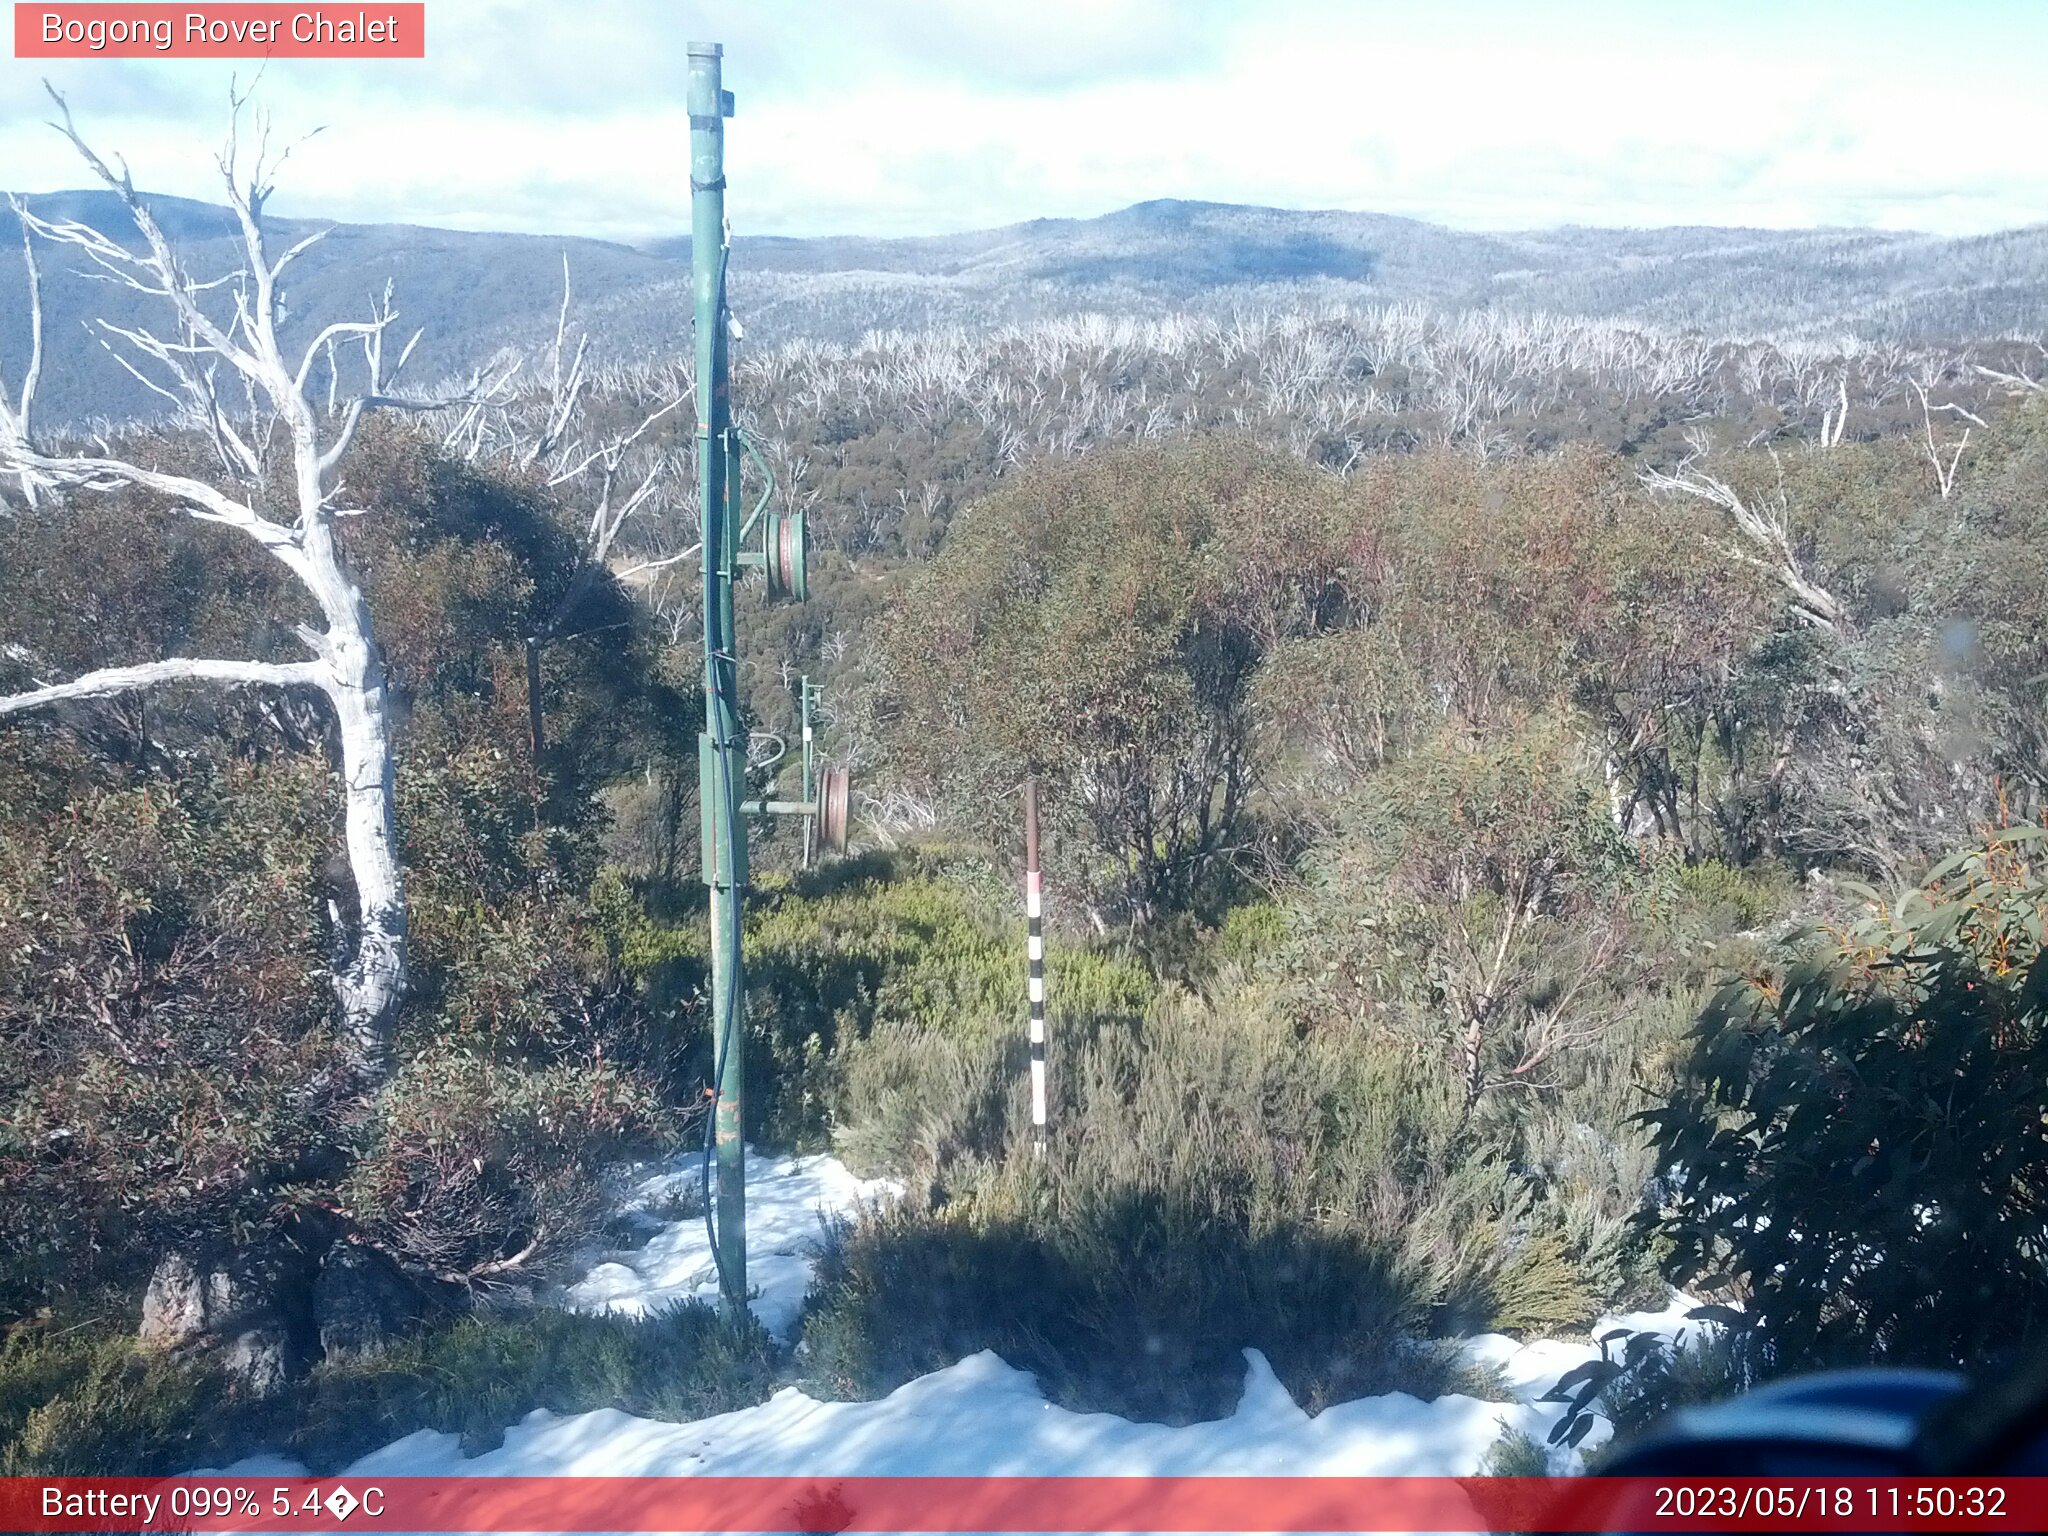 Bogong Web Cam 11:50am Thursday 18th of May 2023